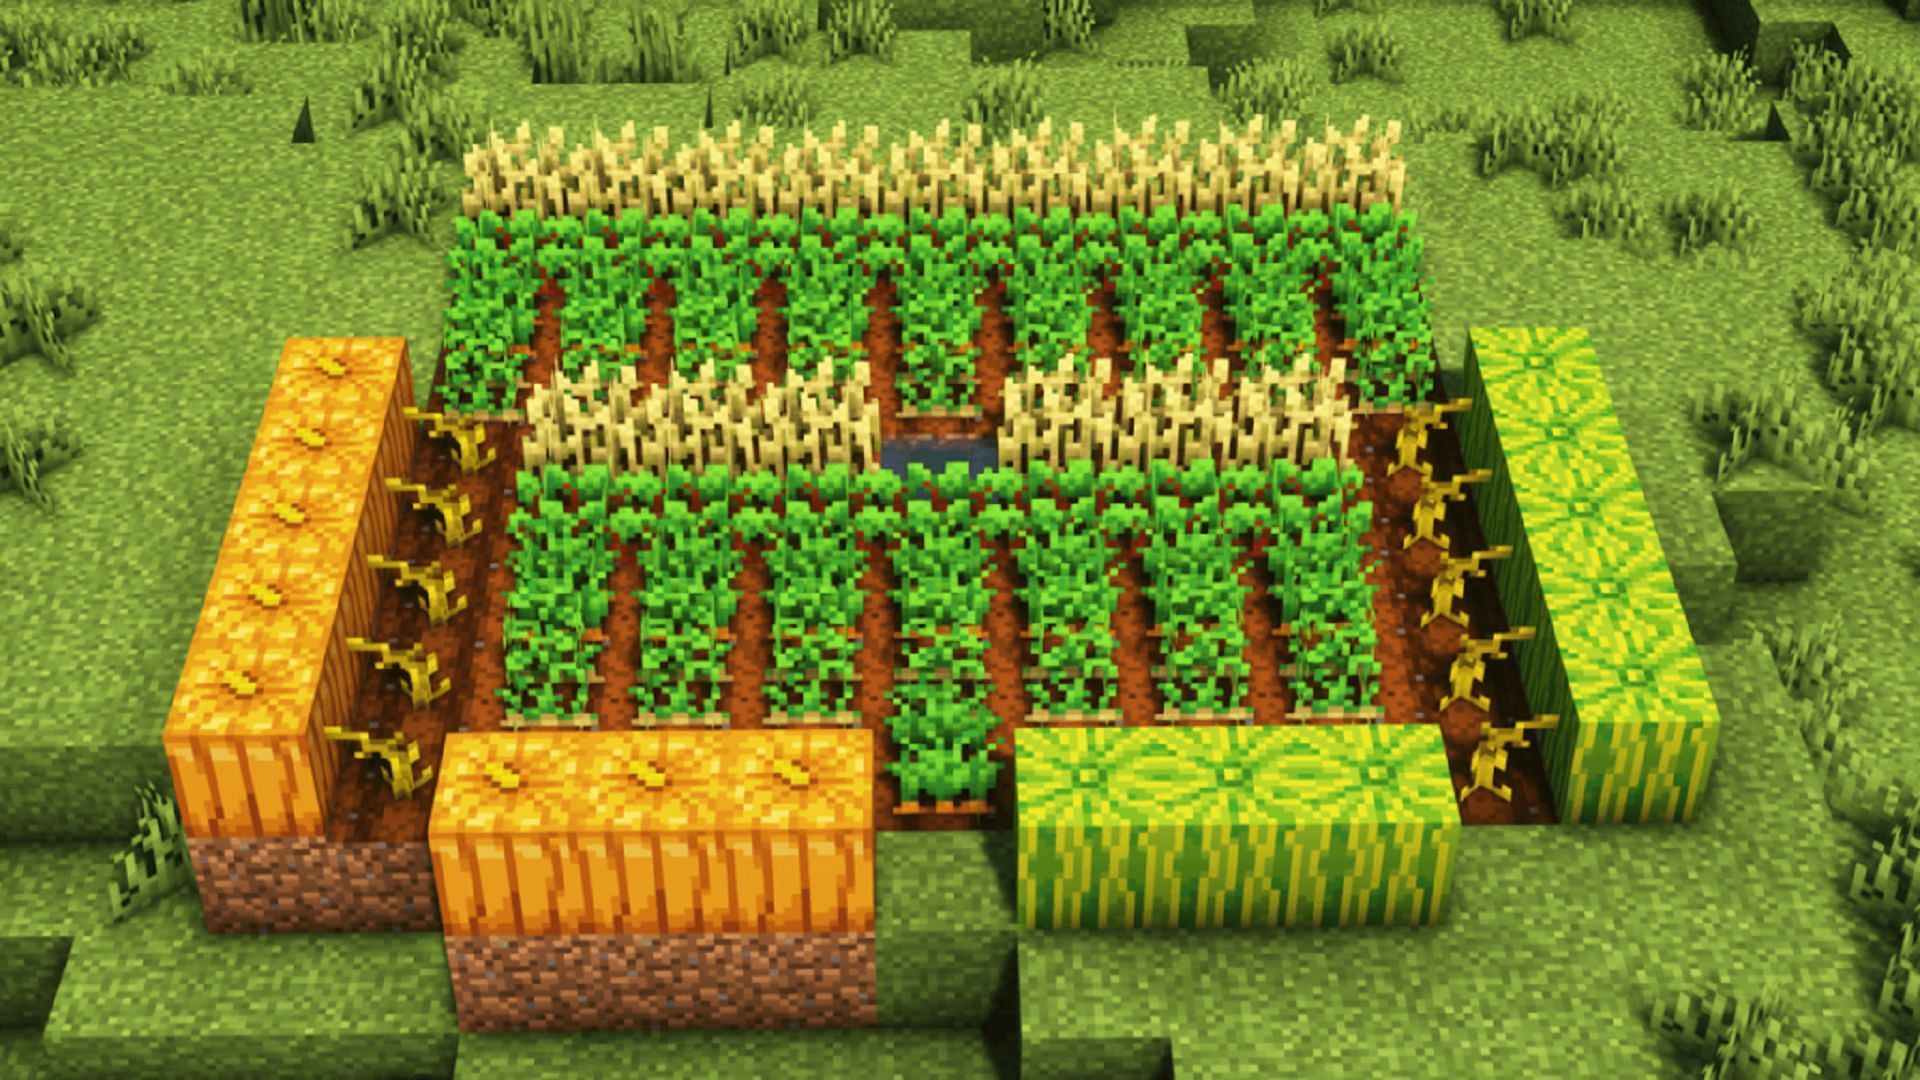 Showcase of Minecraft crops: including pumpkins, watermelons, wheat, potatoes and carrots 